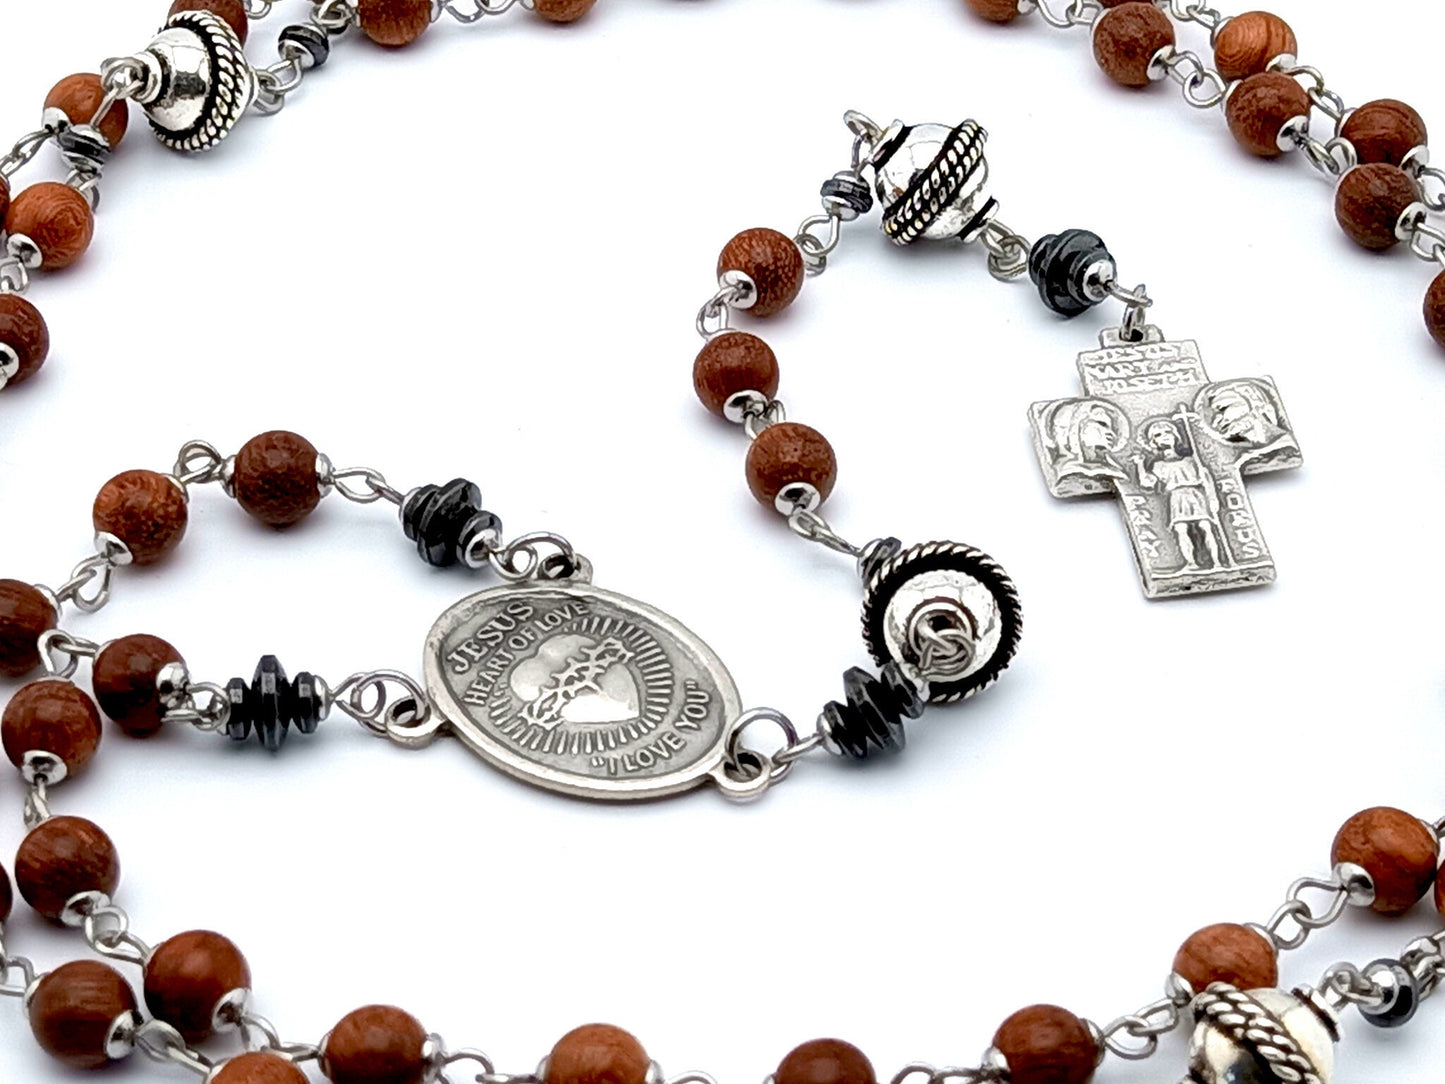 Sacred Heart unique rosaryt beads with dark wood and silver beads, silver Holy Family cross and Sacred Heart centre medal.